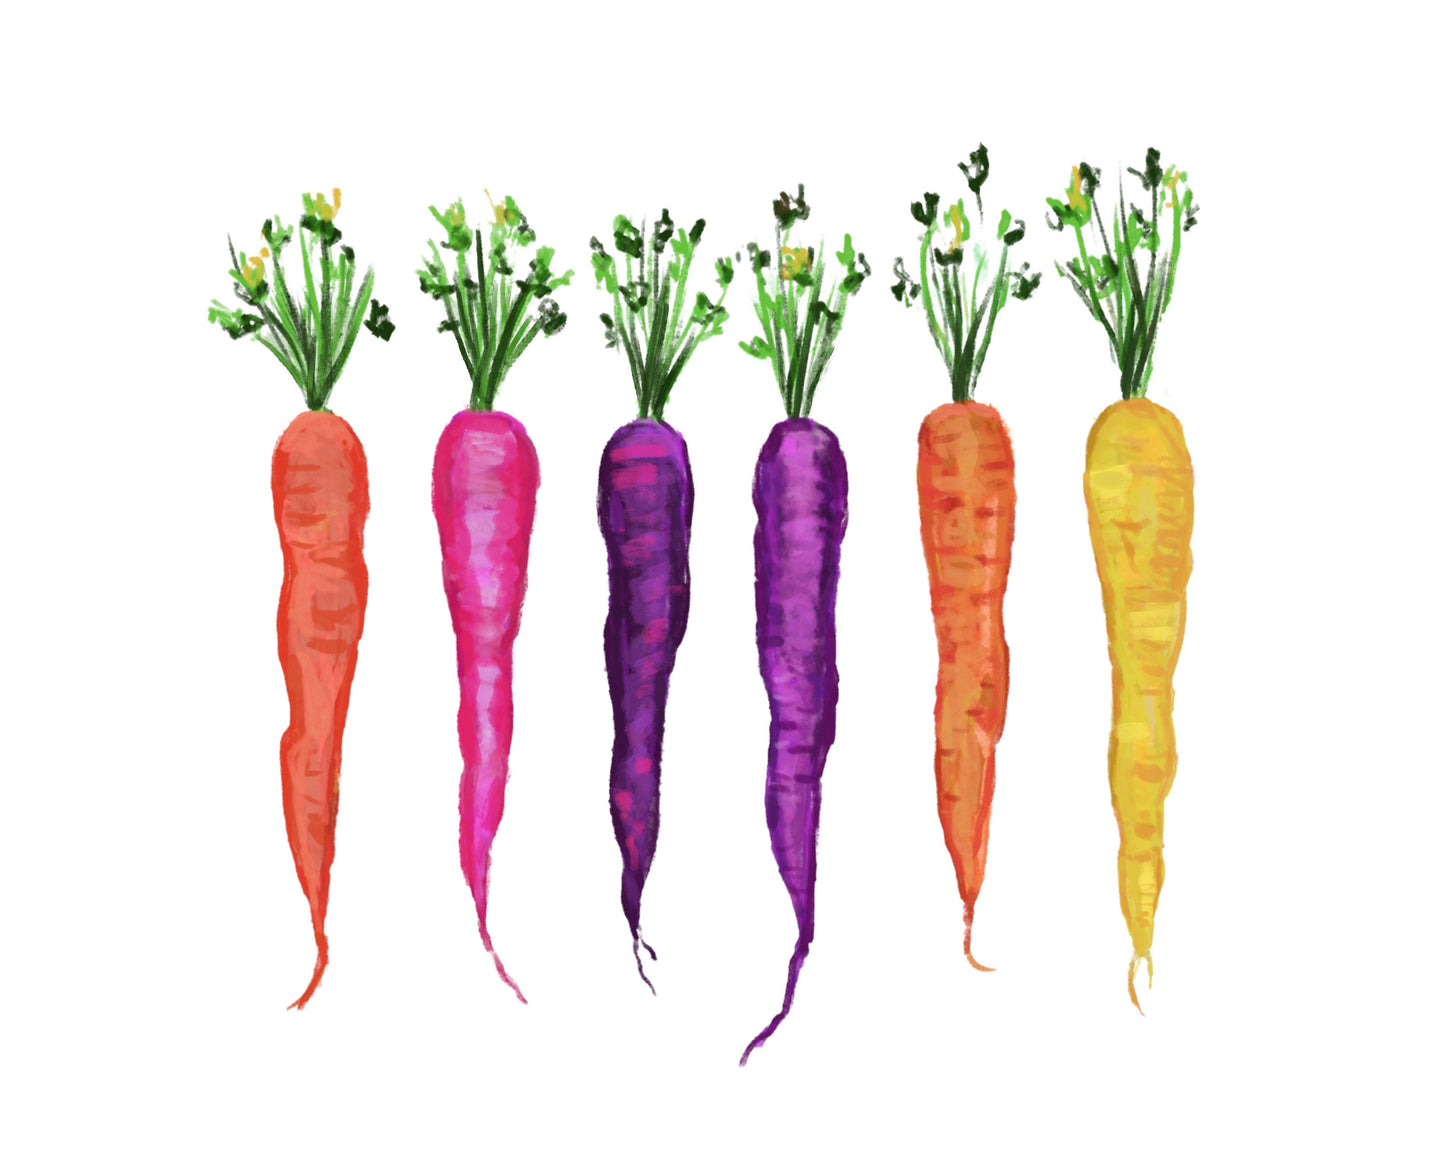 Colorful Carrots Print, Carrot Painting, Vegetable Decor, Kitchen Wall Art, Carrot Bunch Illustration, Food Wall Art